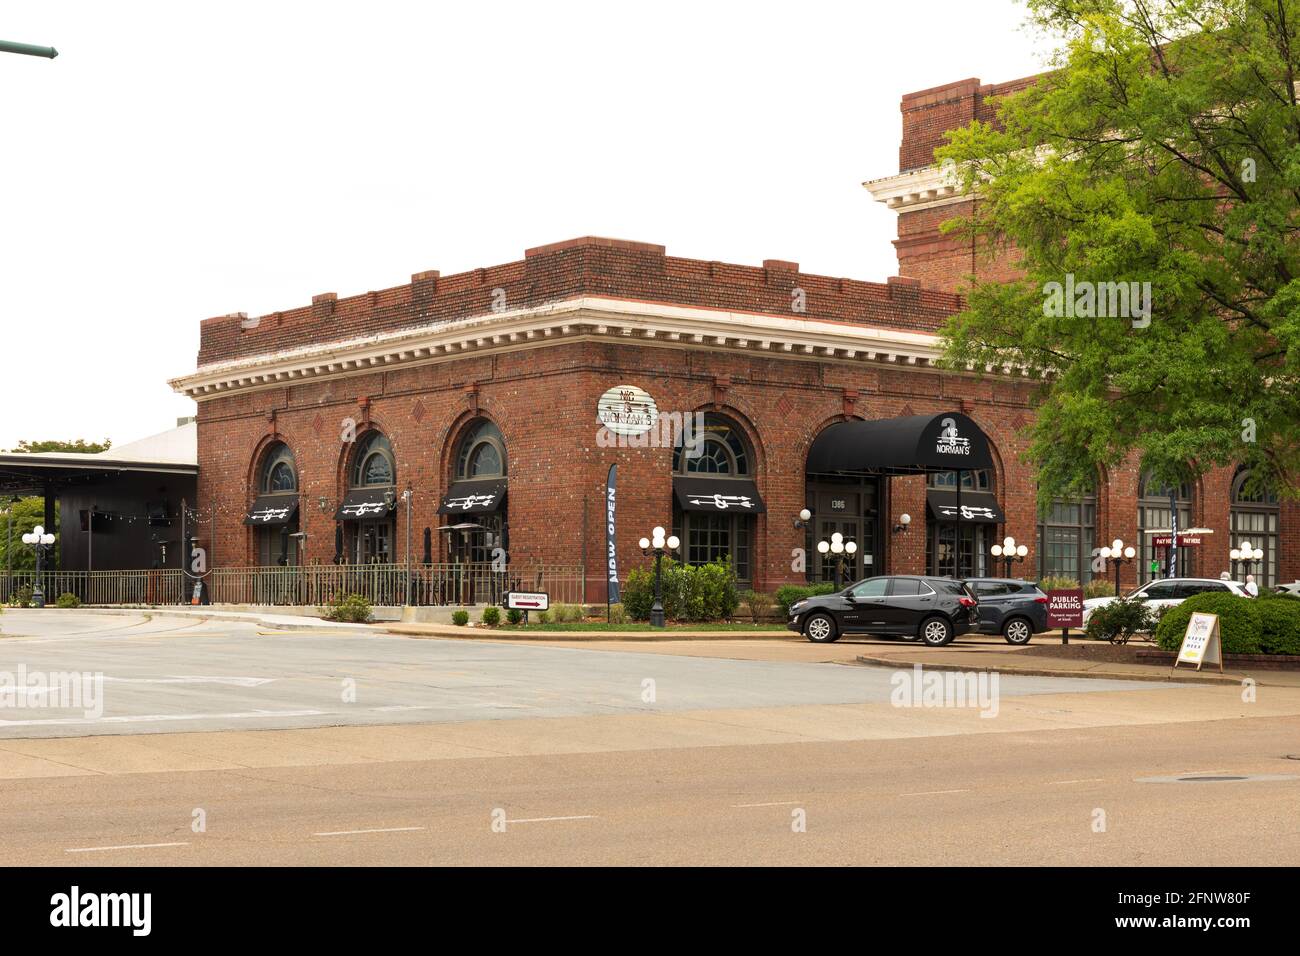 CHATTANOOGA, TN, USA-8 MAY 2021: Nic & Norman's Restaurant, in one wing of the Chattanooga Choo Choo hotel.  Building and parking lot.  Copy space. Stock Photo